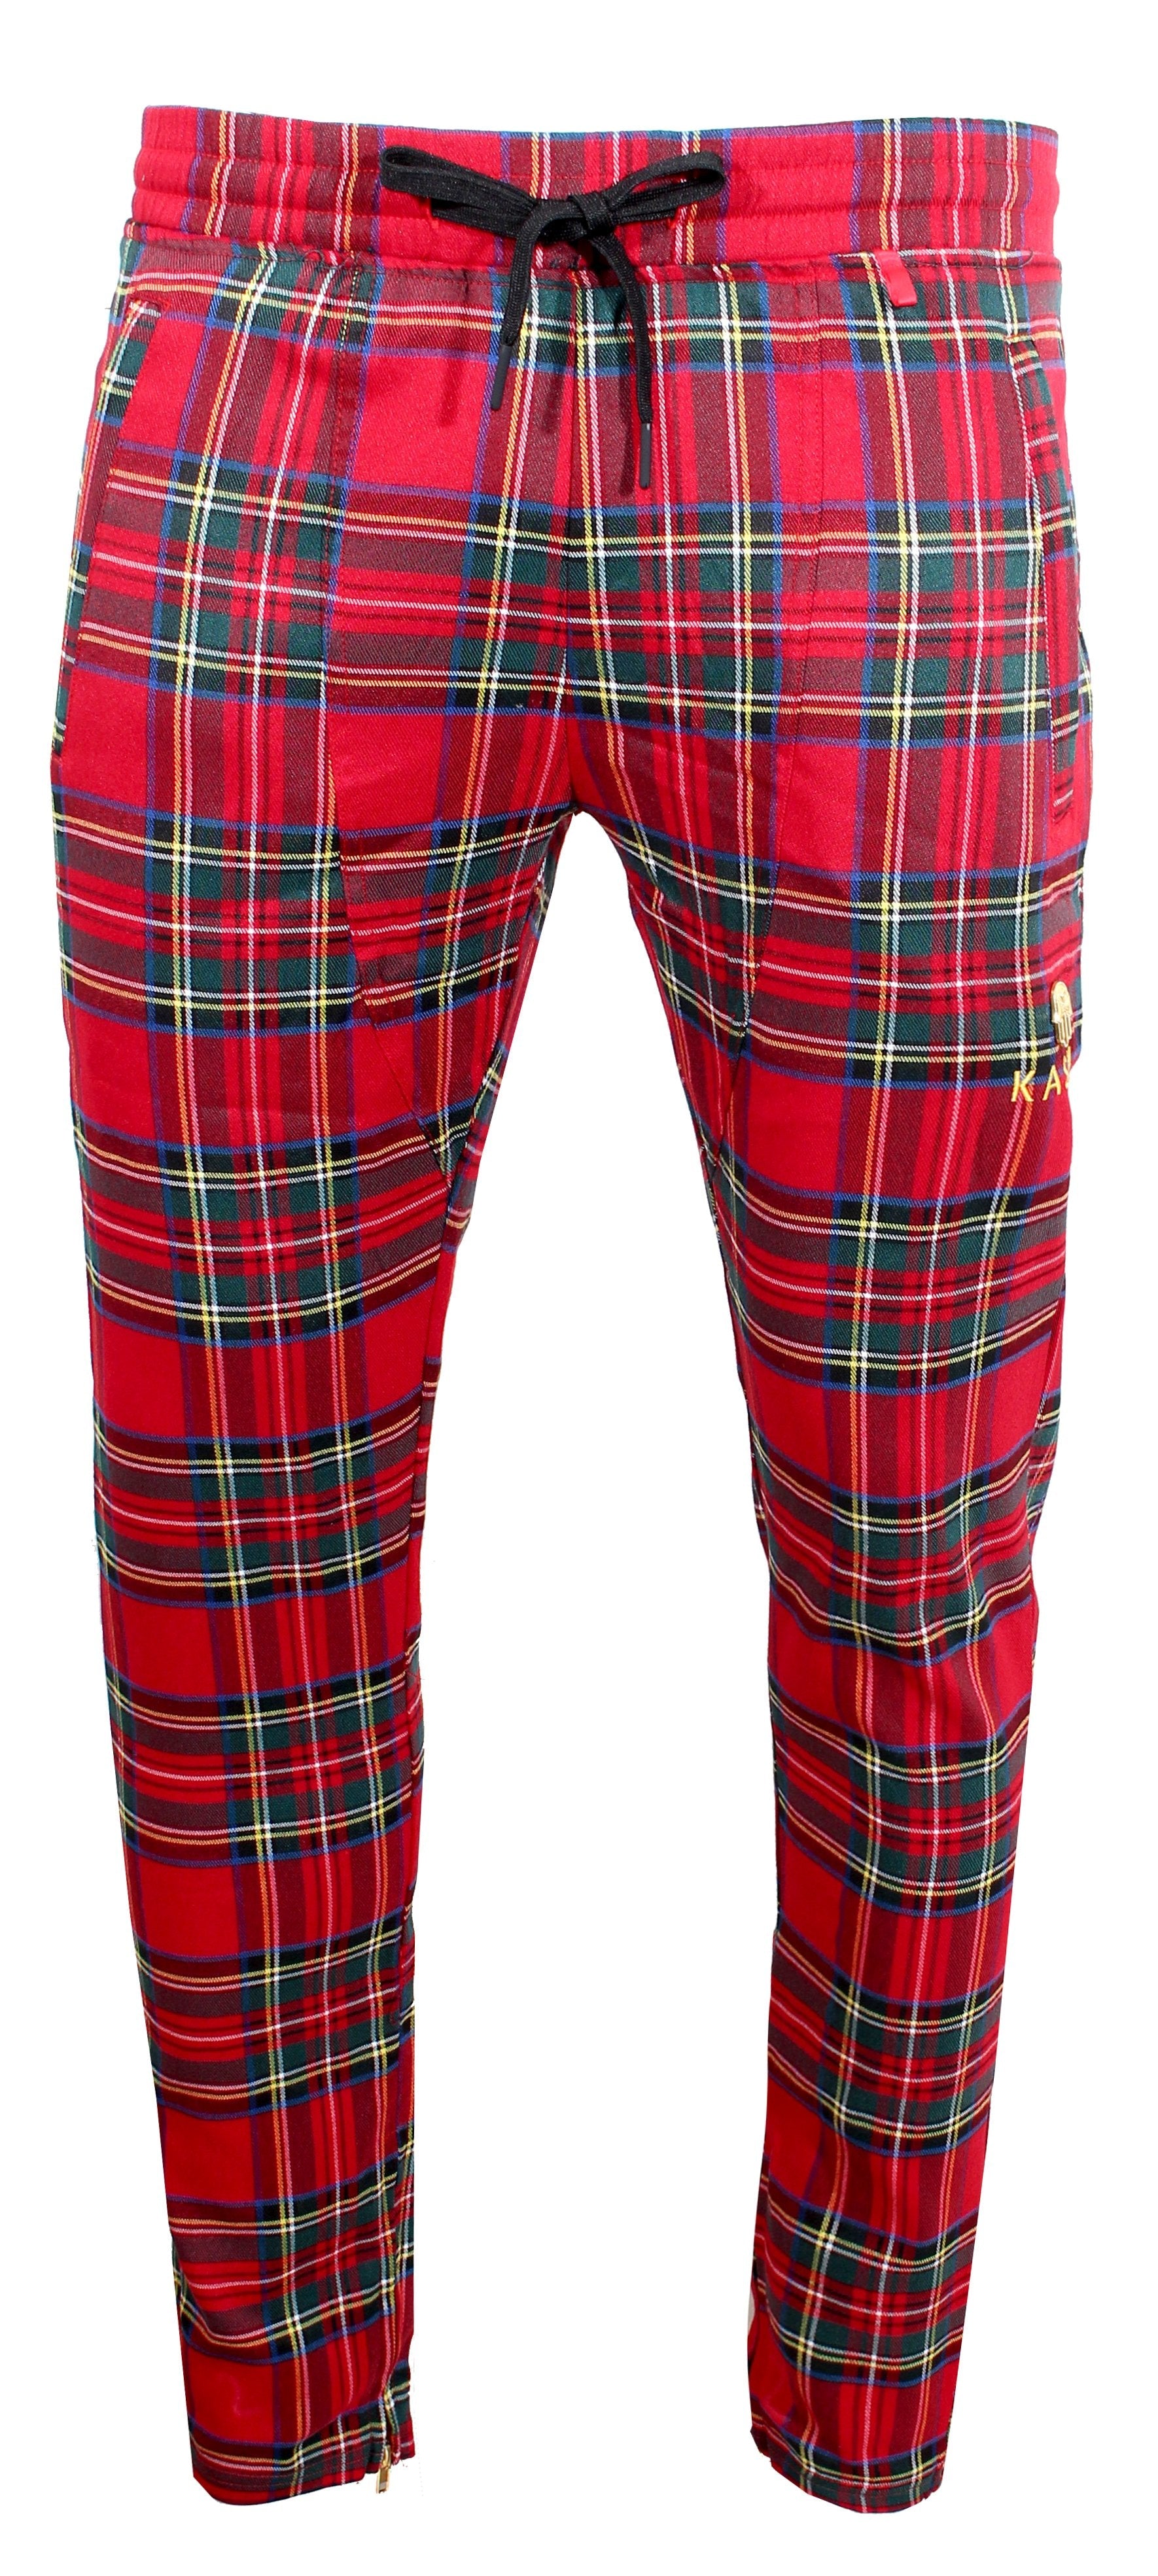 Red Plaid Track Pants with No Stripes & Embroidered 'KASH' on